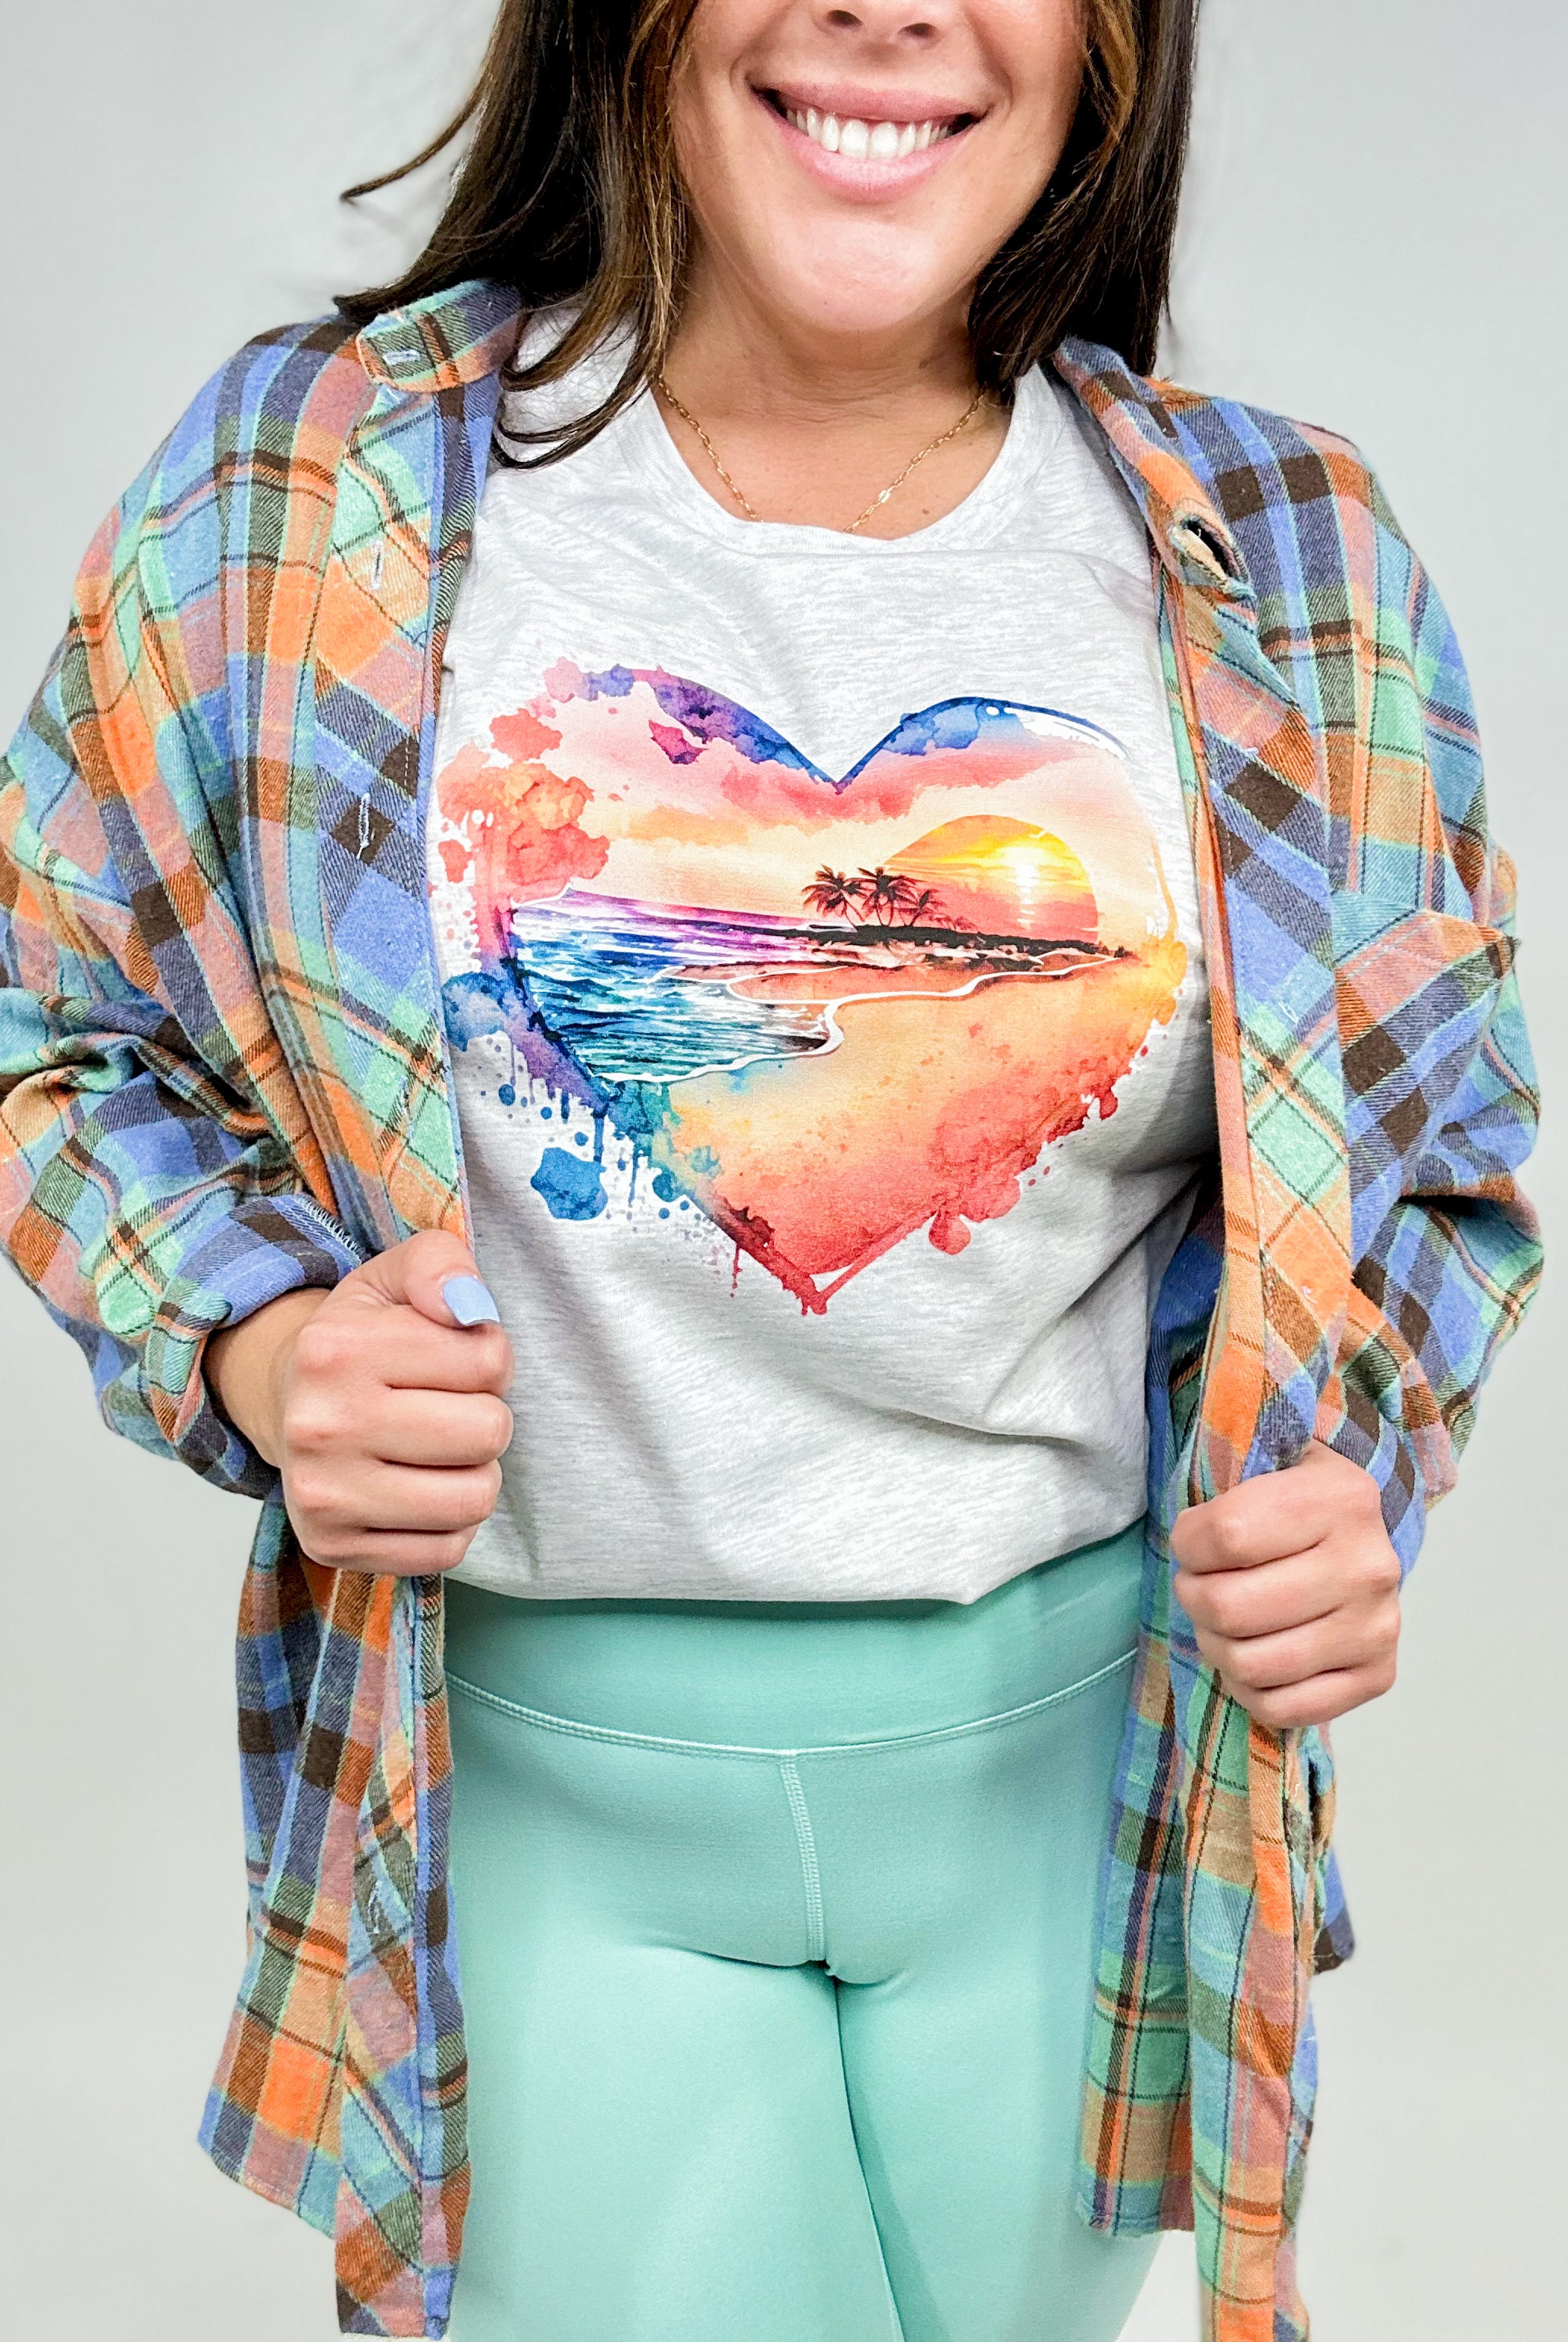 Beach Sunset in my Heart Graphic Tee-130 Graphic Tees-Handmade by Heather-Heathered Boho Boutique, Women's Fashion and Accessories in Palmetto, FL